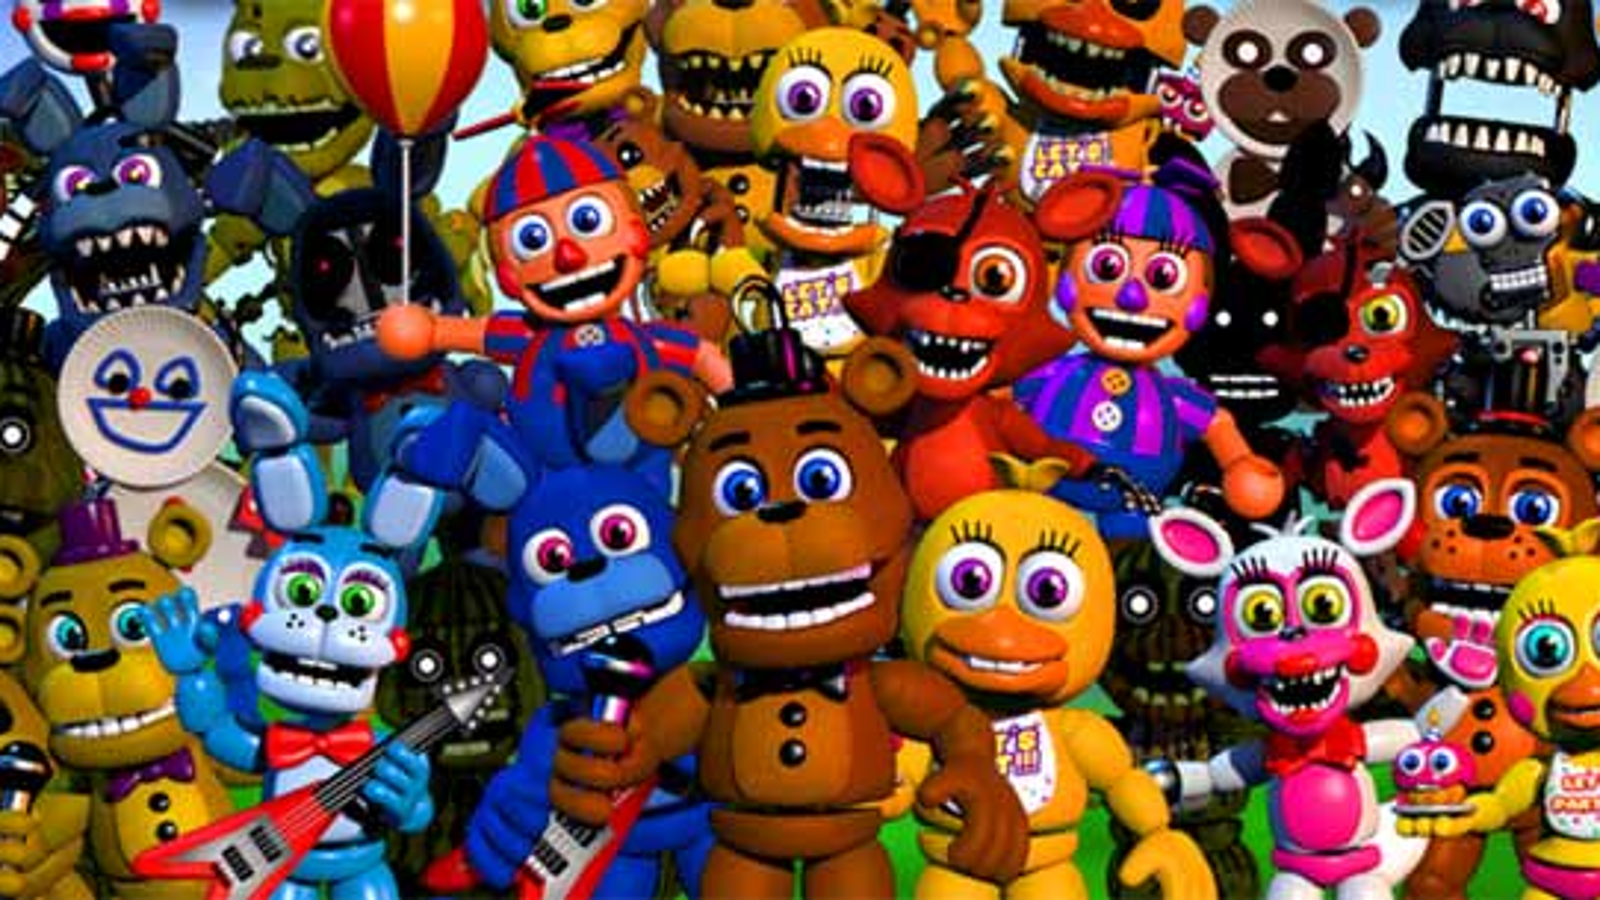 Fnaf Movie: 5 Insane Facts You Won't Believe!